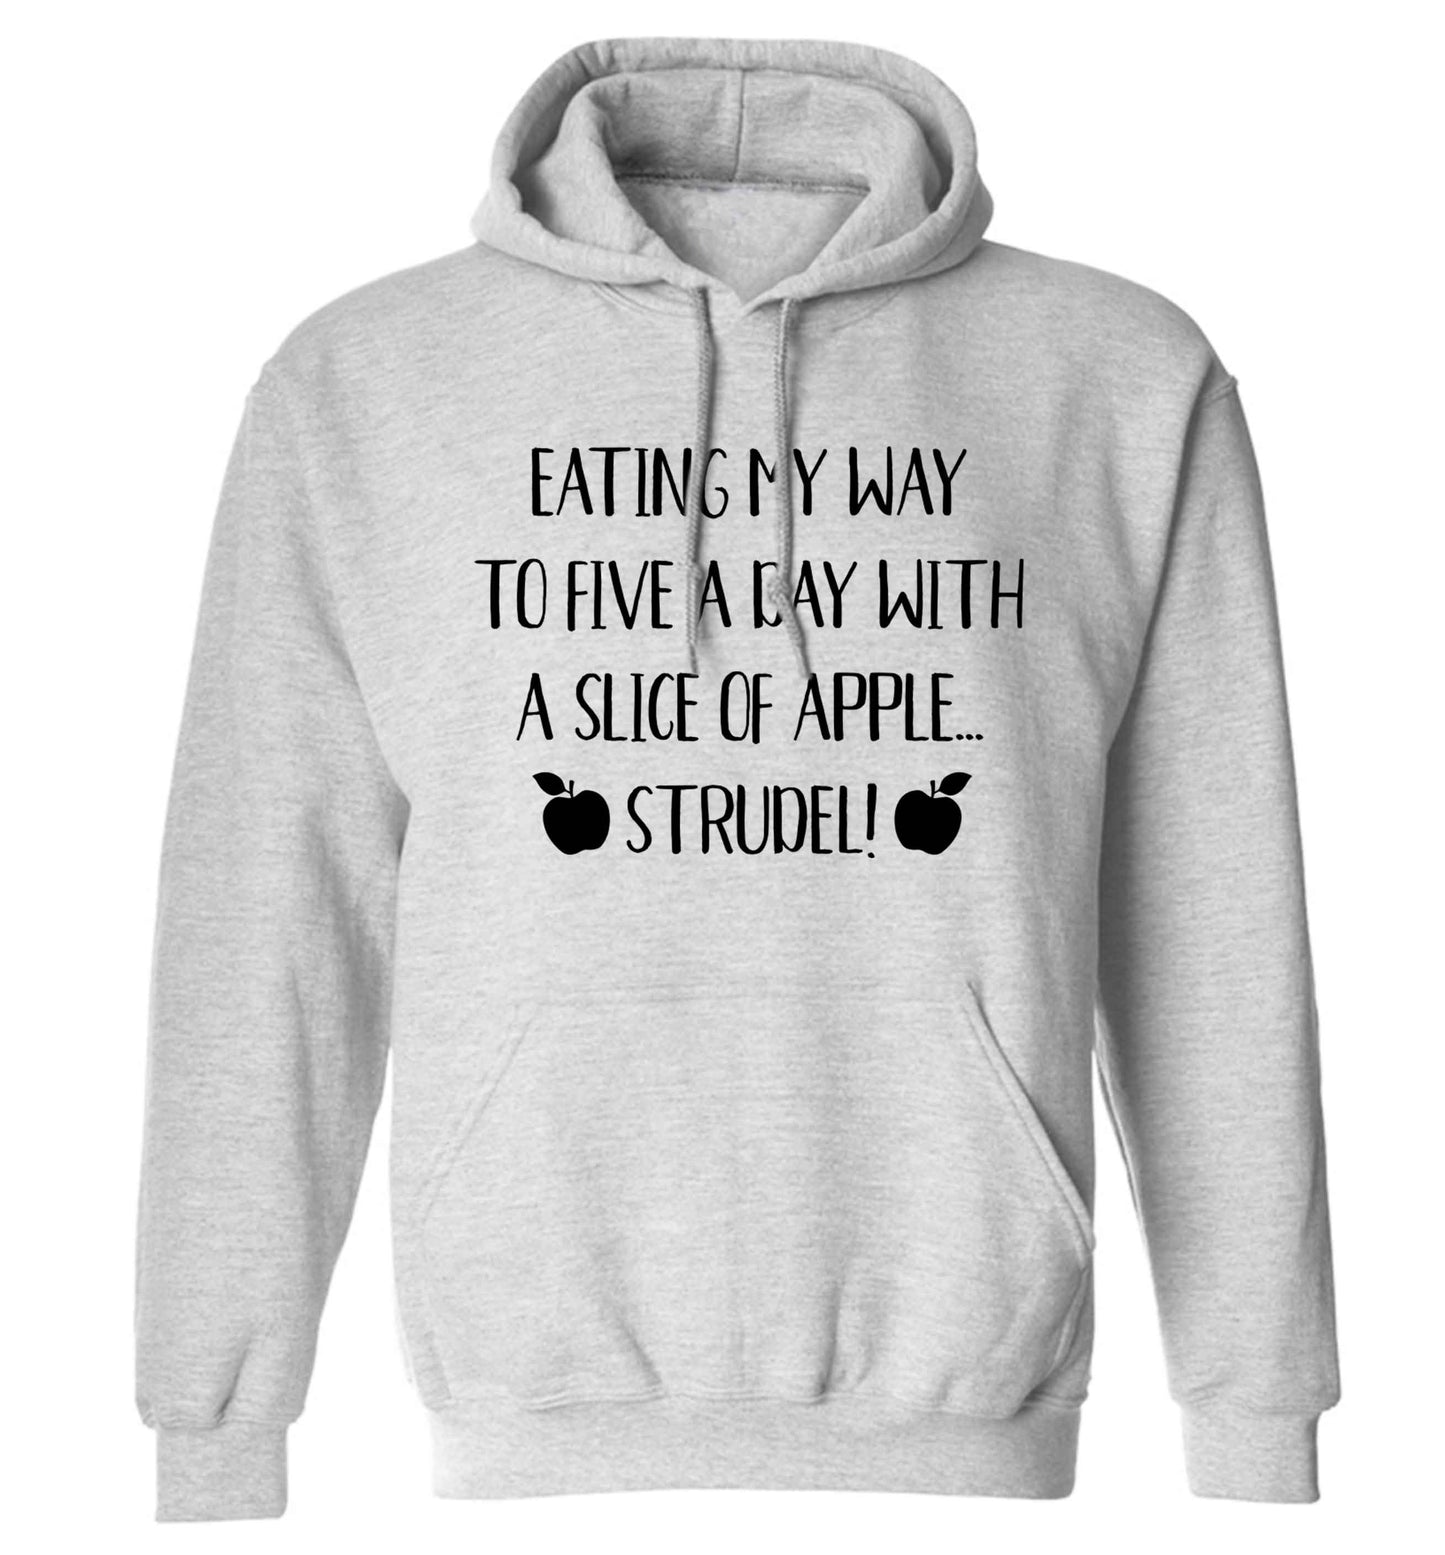 Eating my way to five a day with a slice of apple strudel adults unisex grey hoodie 2XL